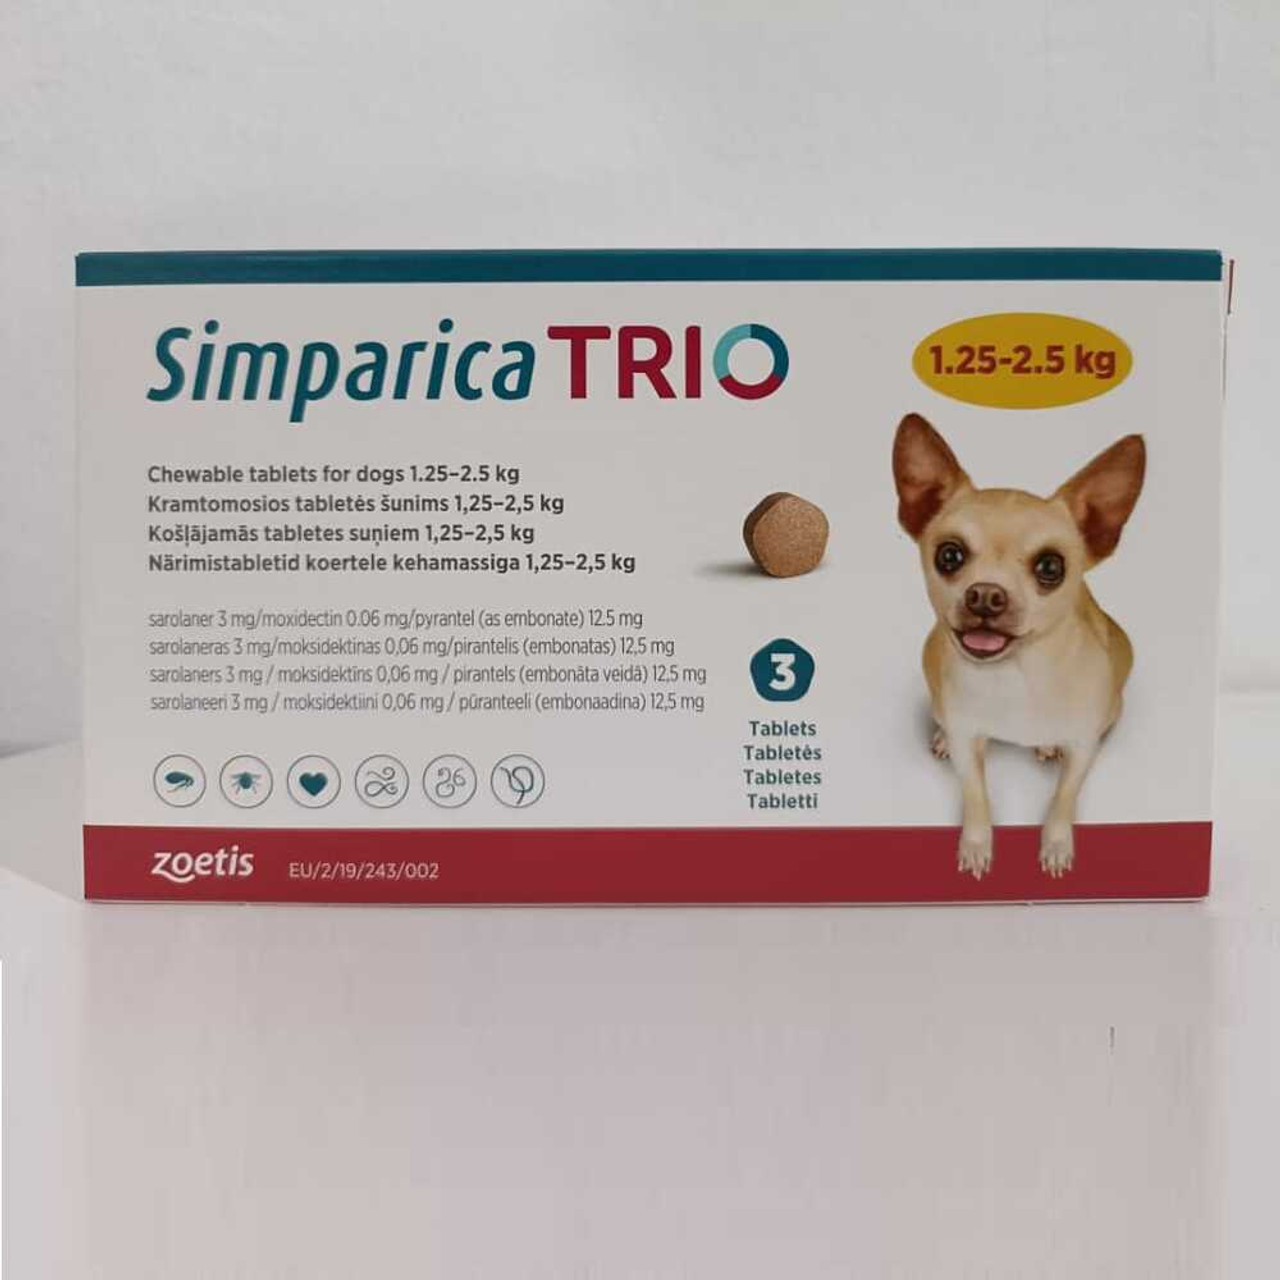 Simparica Trio Chewable Tablets for Dogs weighing 1.25-2.5kg (2.8-5.5) lbs 3 Pack | Unitedpetworld.Com